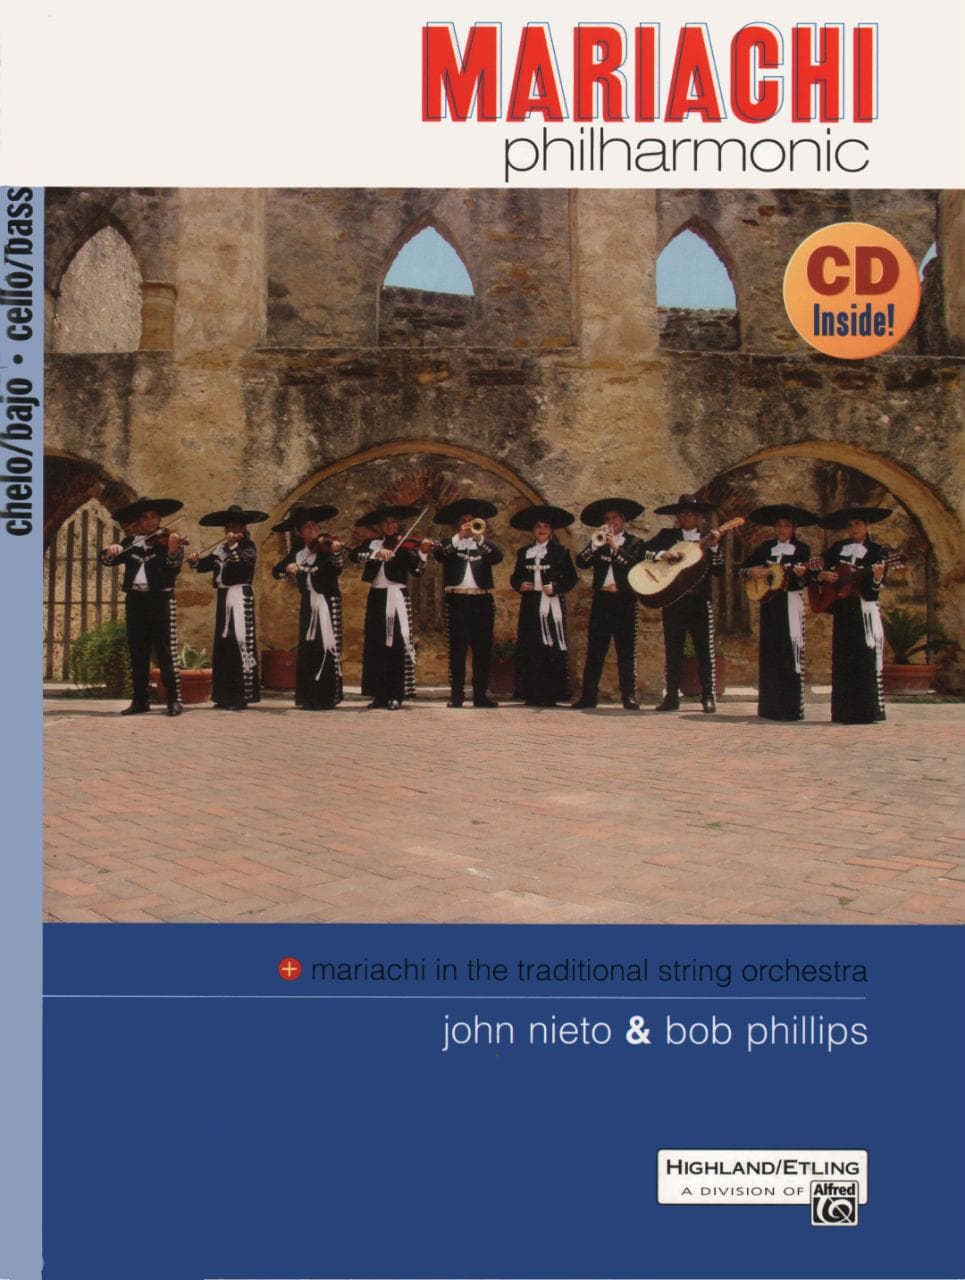 Phillips - Mariachi Philharmonic For Cello Bass Book and CD, Volume 1 Published by Mel Bay Publications, Inc